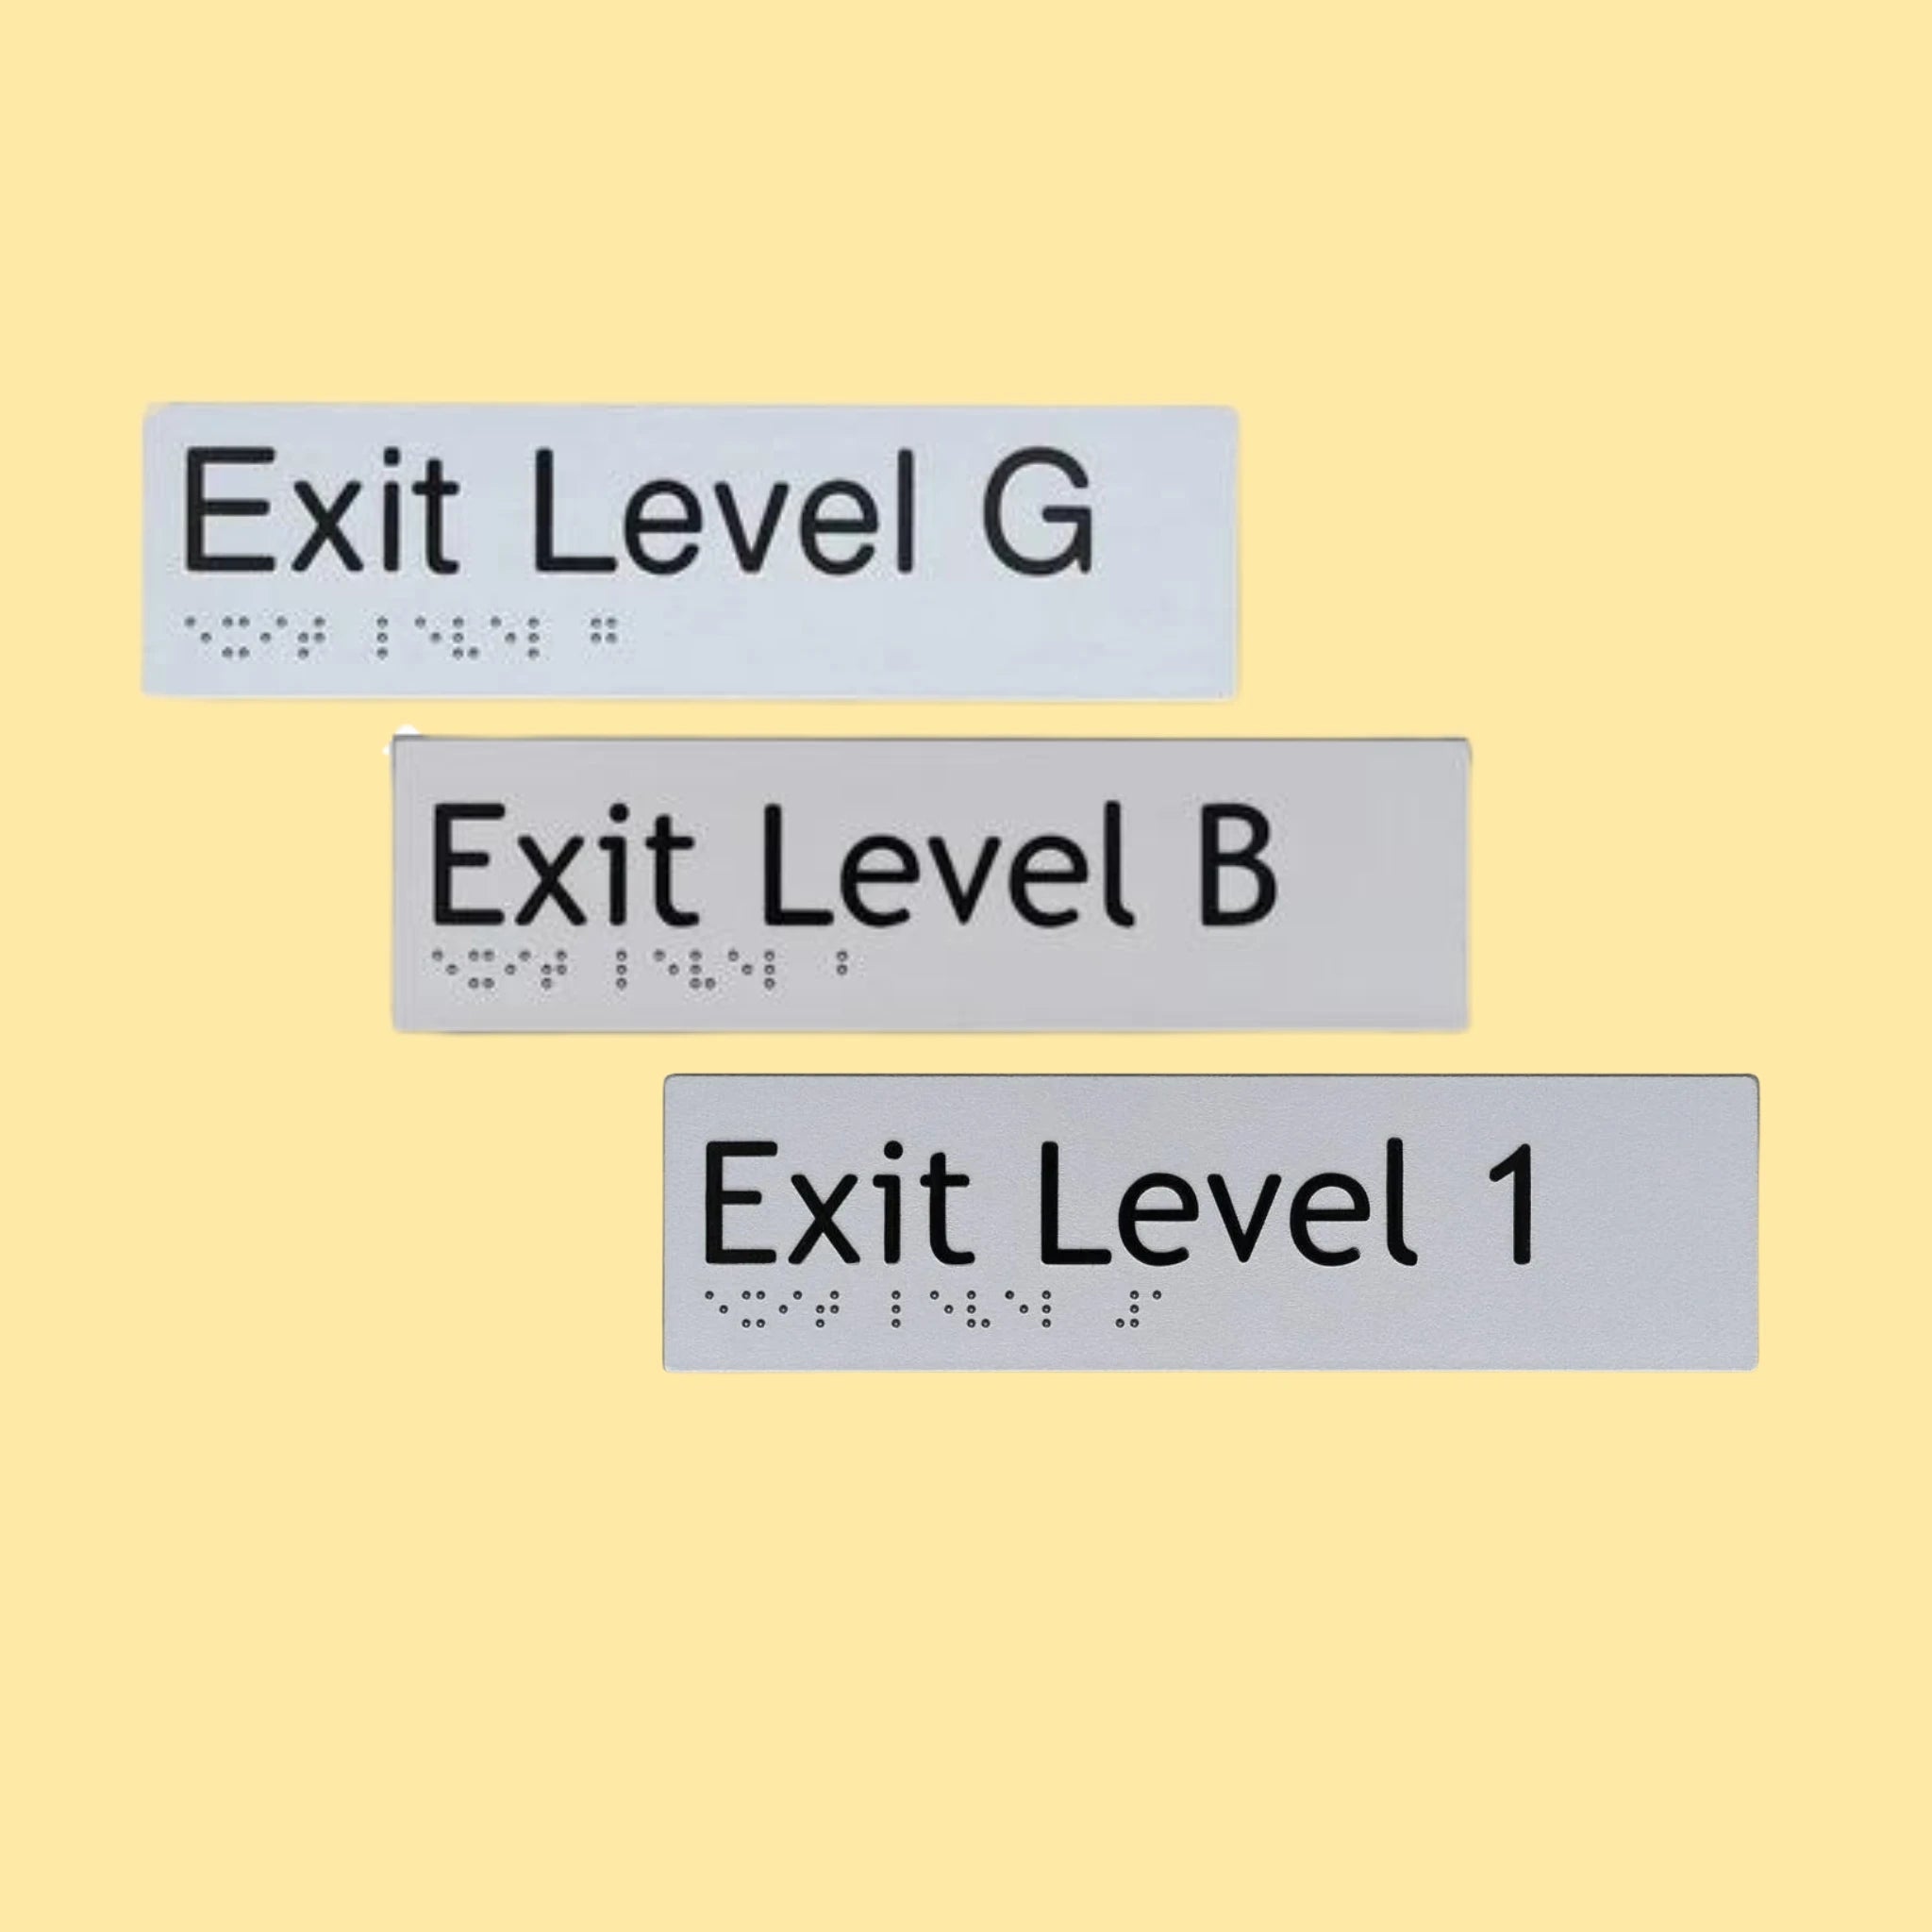 Braille Exit Signs